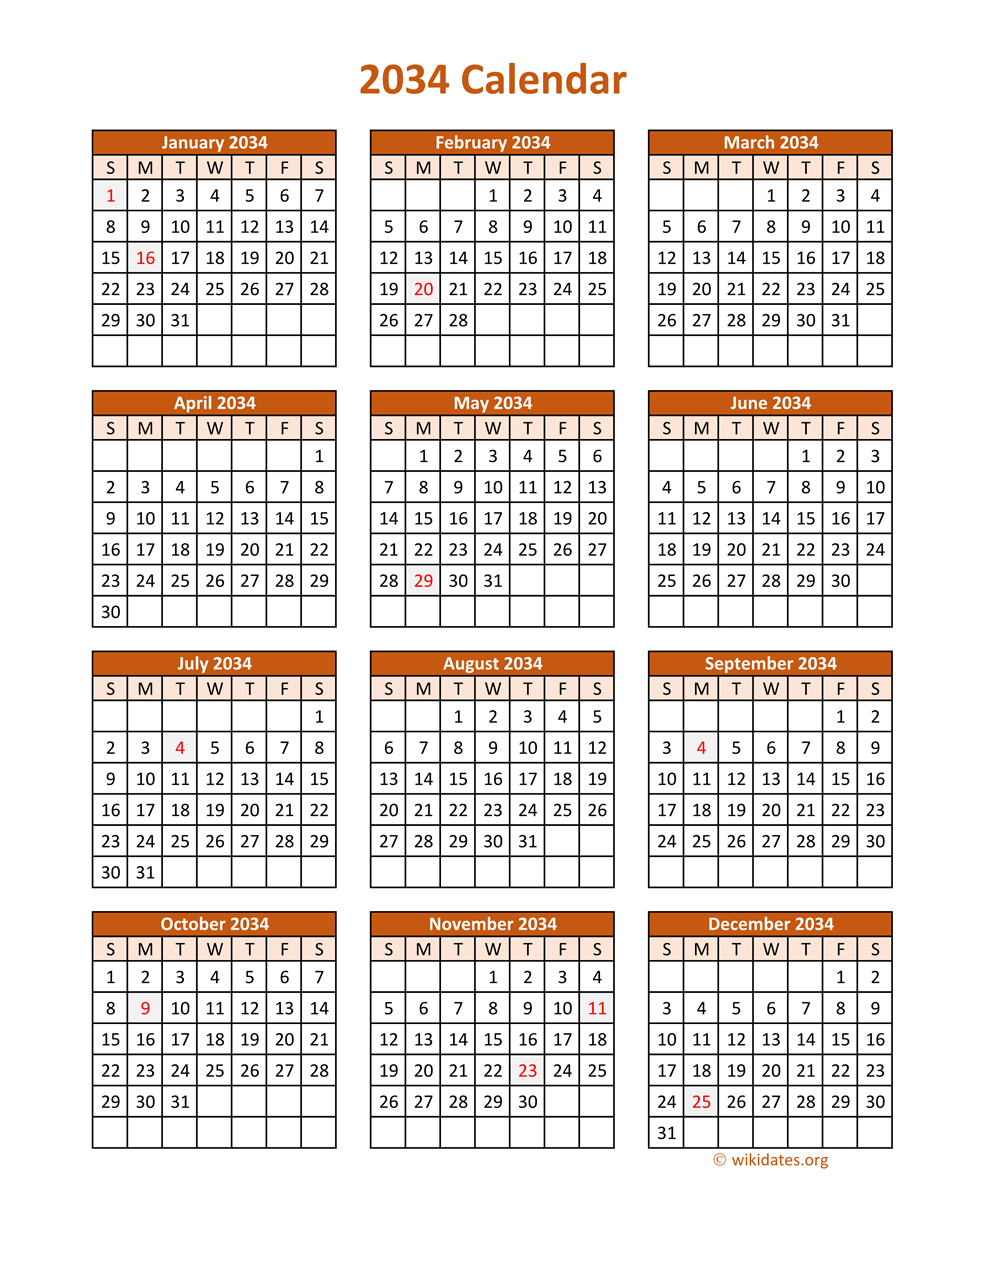 full-year-2034-calendar-on-one-page-wikidates